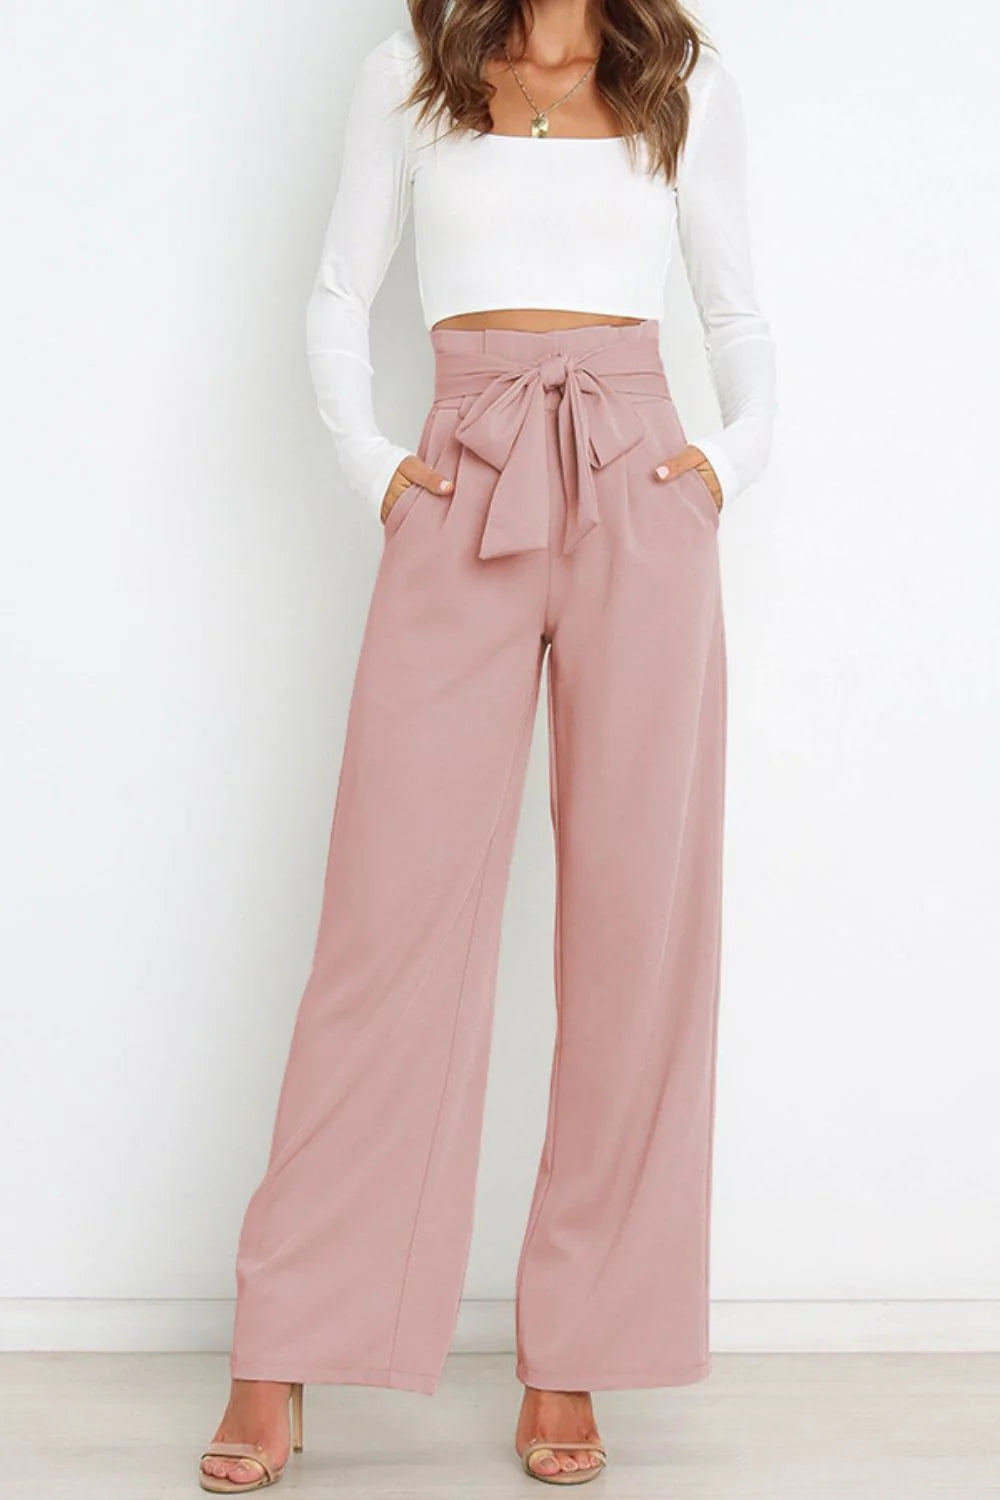 Upgrade Your Style with These 10 Pant Options!